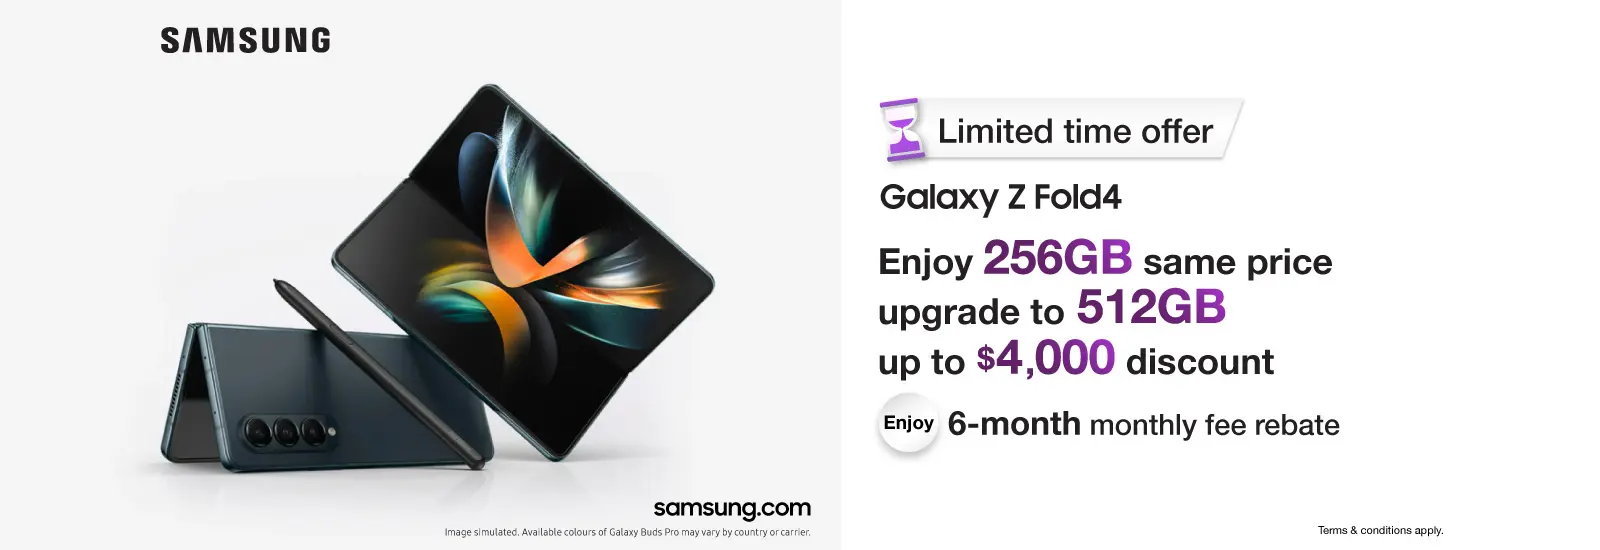 The new Samsung Galaxy Z Series with the signature foldable screen.